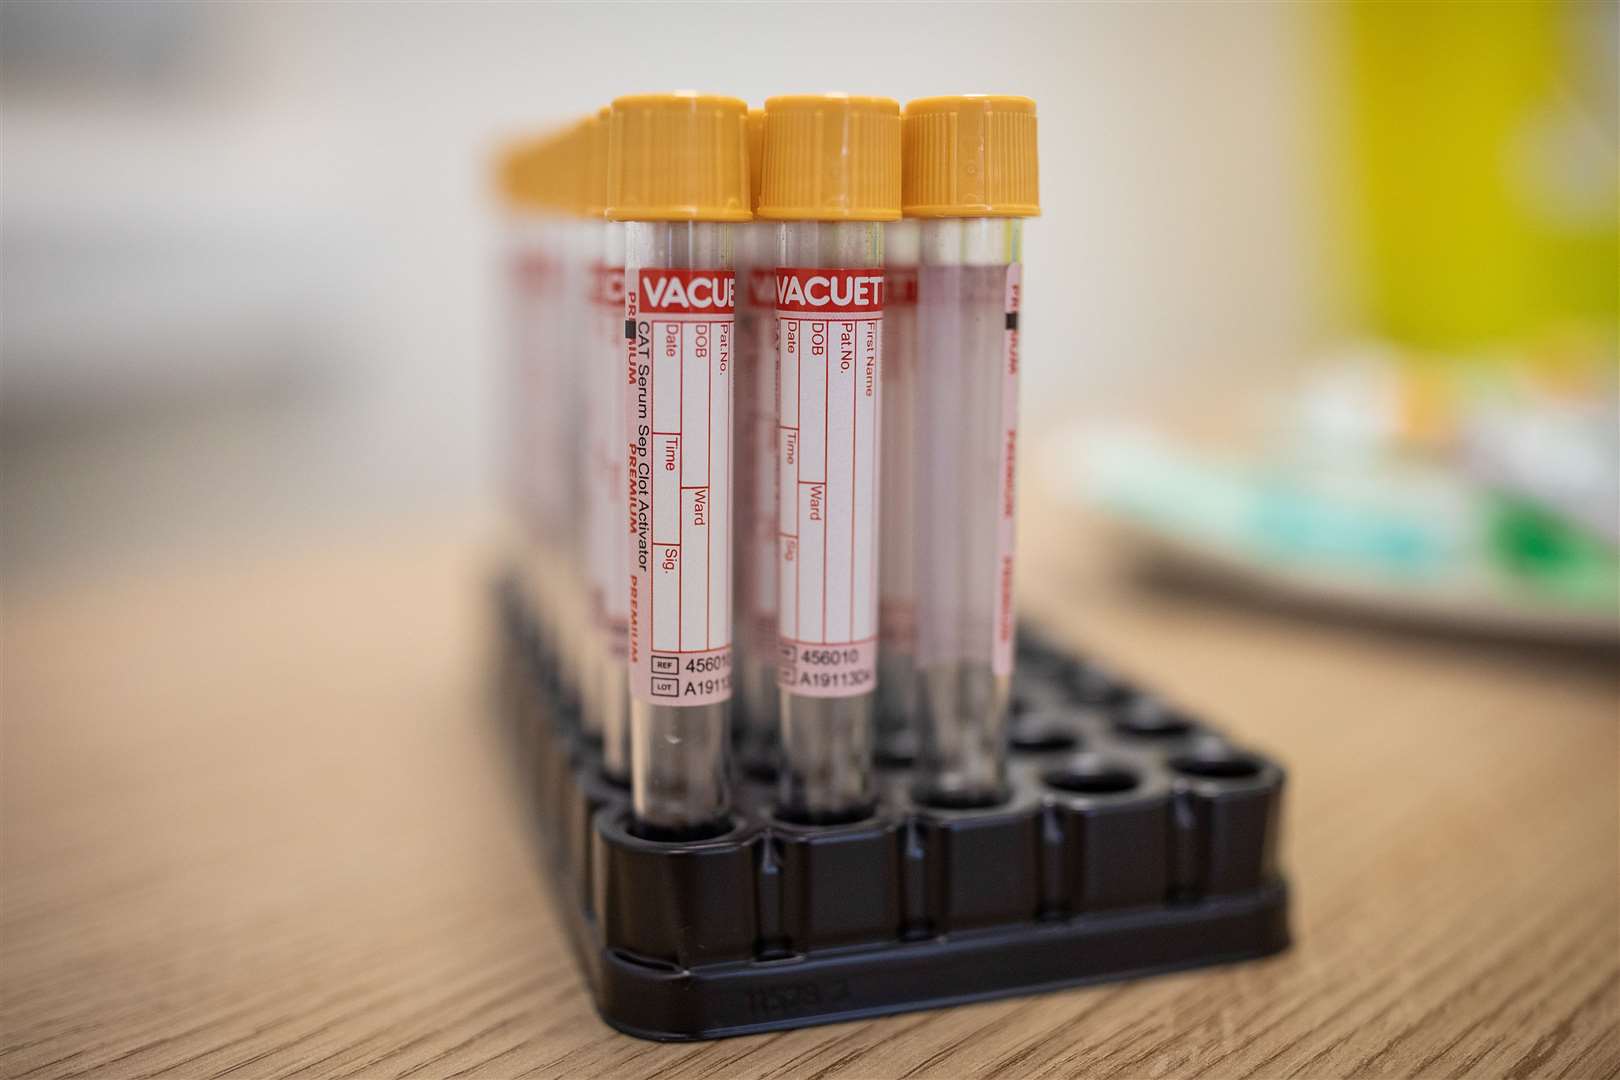 People in England are legally required to self-isolate if they test positive for Covid-19 (Simon Dawson/PA)